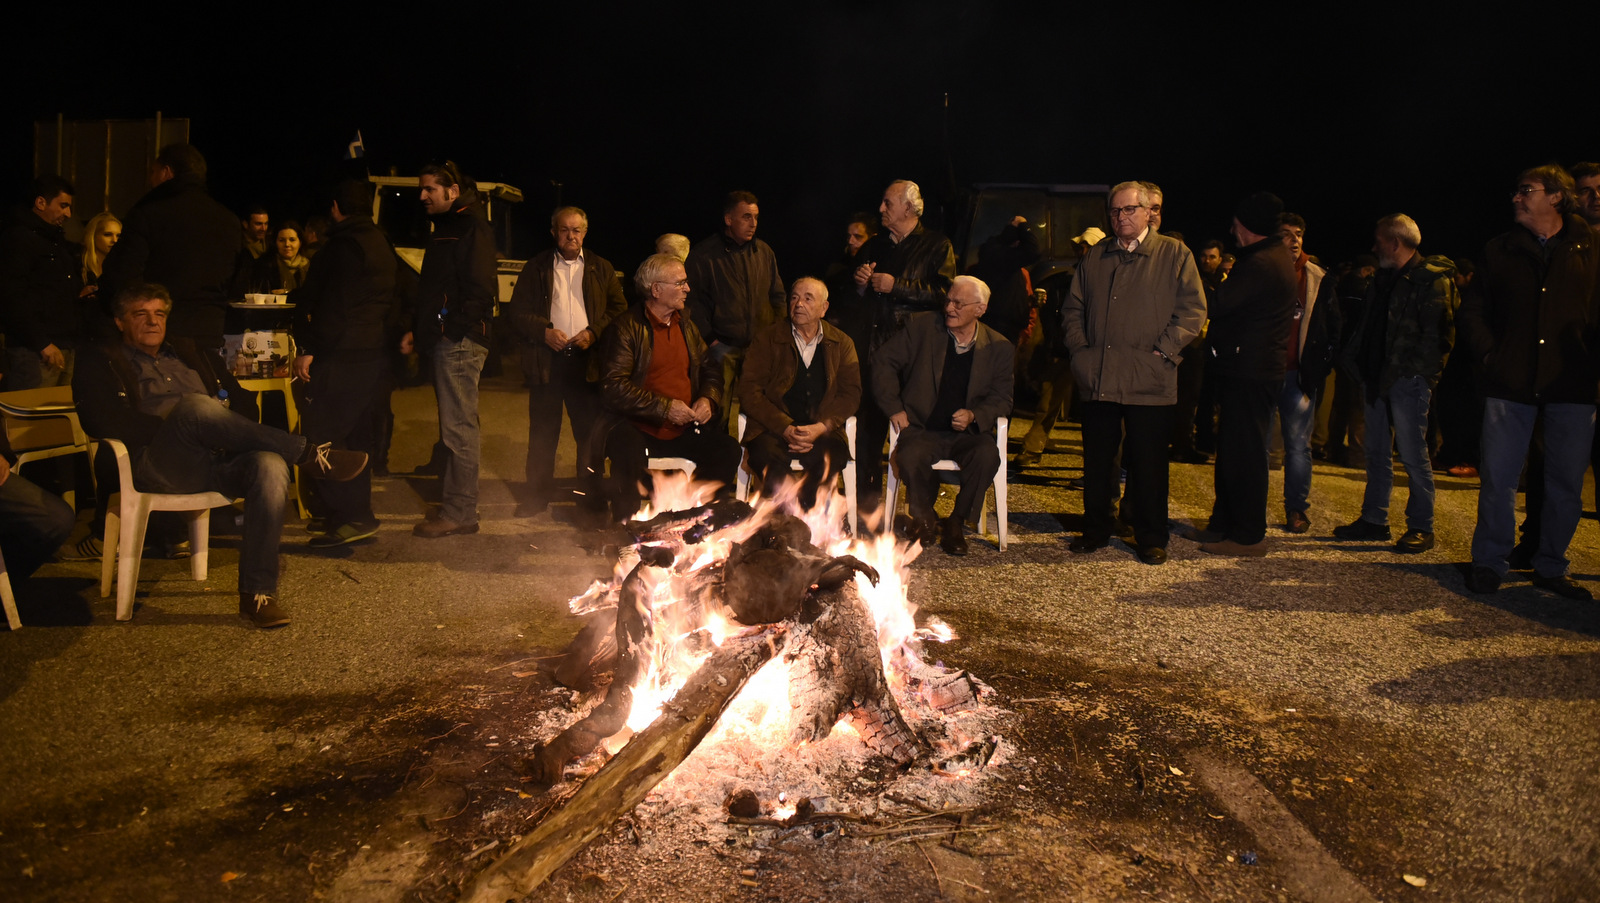 In this Feb. 2, 2016 photo farmers stand behind a makeshift fire in front of tractors, near Kerdilia, Greece. Combine a rapidly aging population, a depleted work force and leaky finances and any country’s pension system would be in trouble. For debt-hobbled, unemployment-plagued Greece, it’s a nightmare.(AP/Giannis Papanikos)